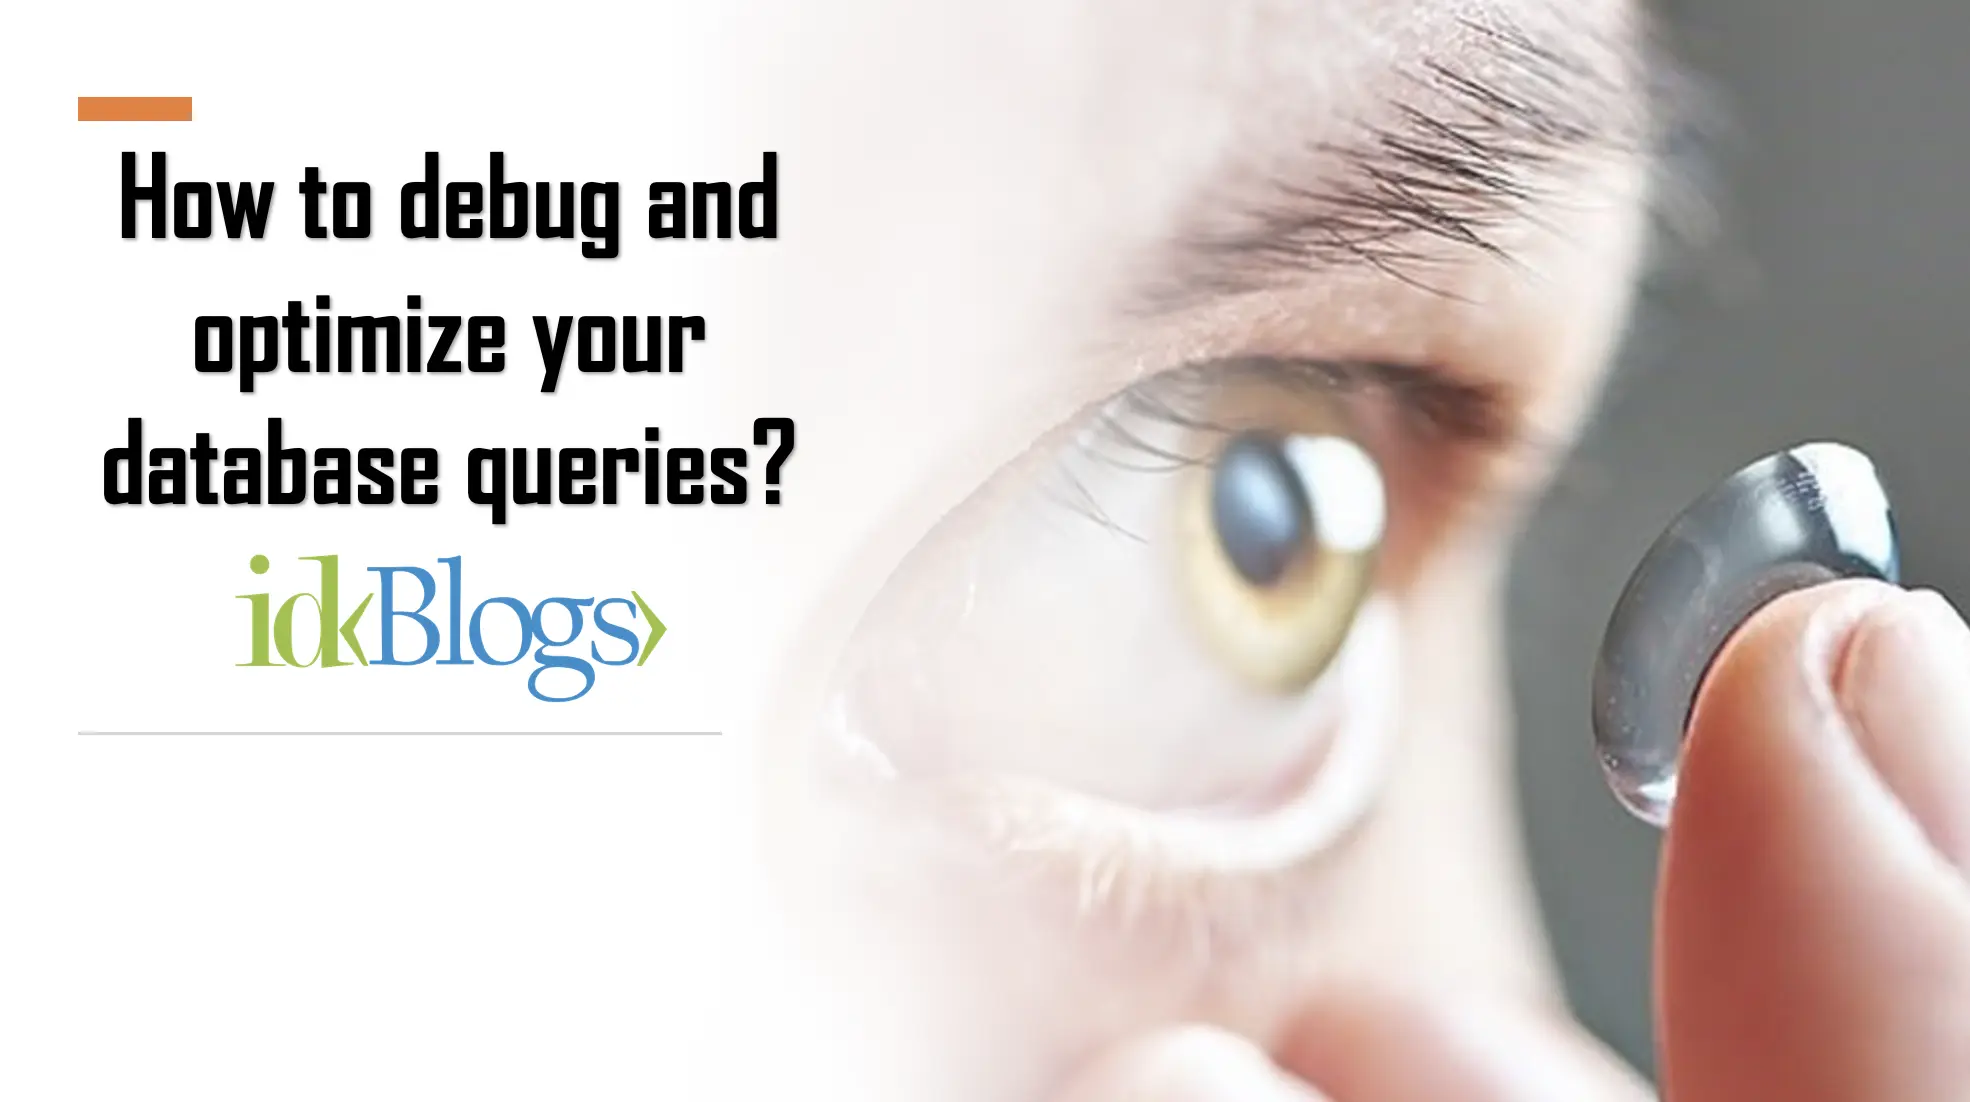 How to debug and optimize your database queries?